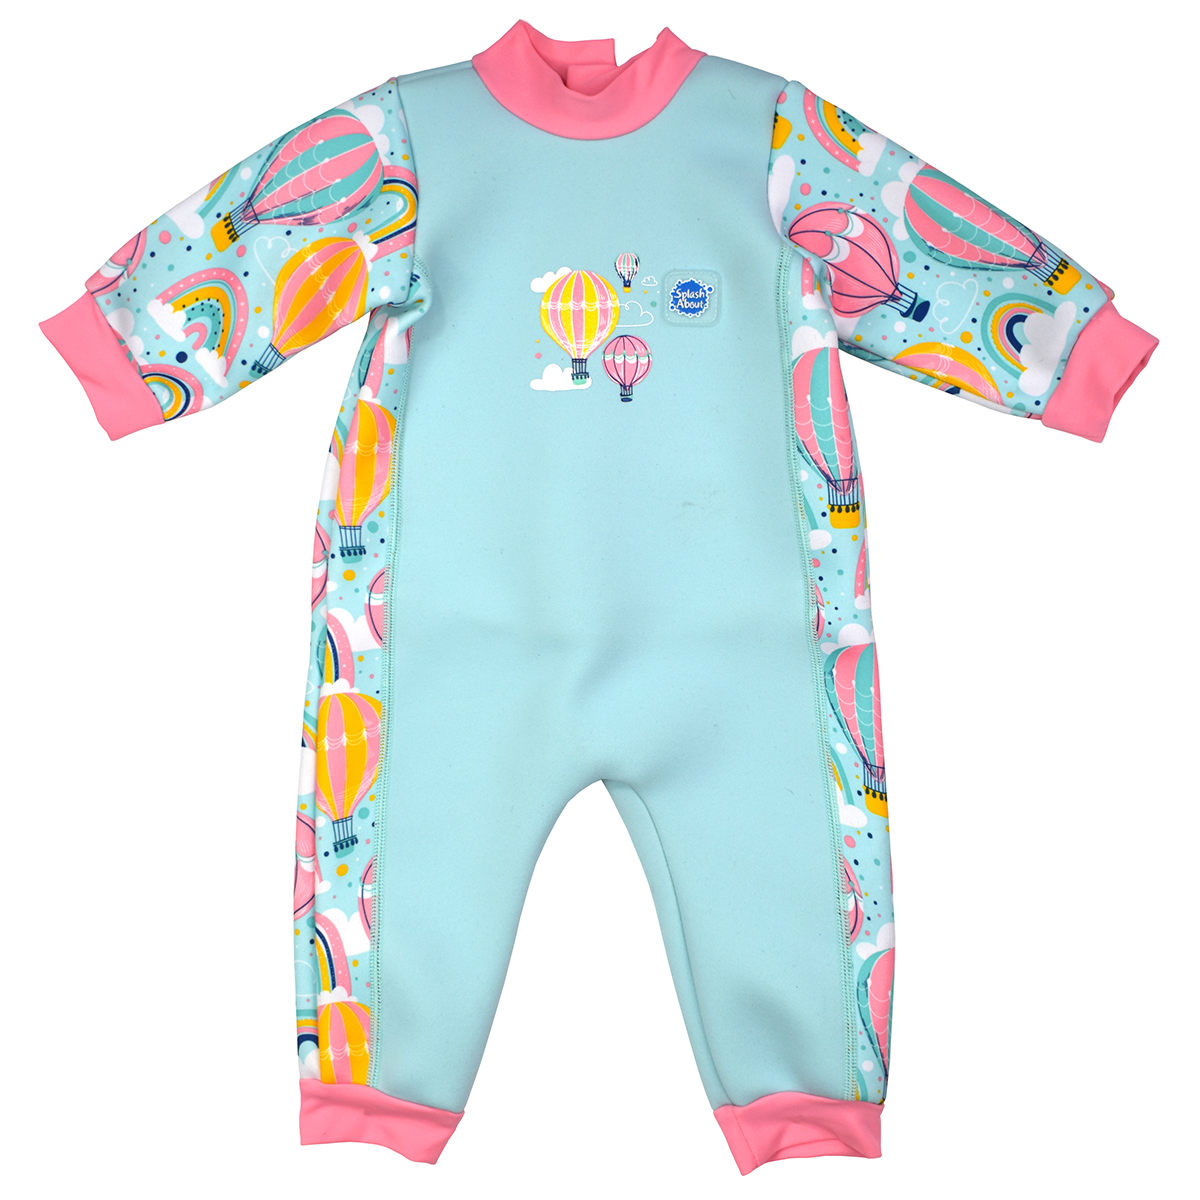 Fleece-lined baby wetsuit in baby blue with pink trims and hot air balloons themed print, including rainbows and clouds. Front.